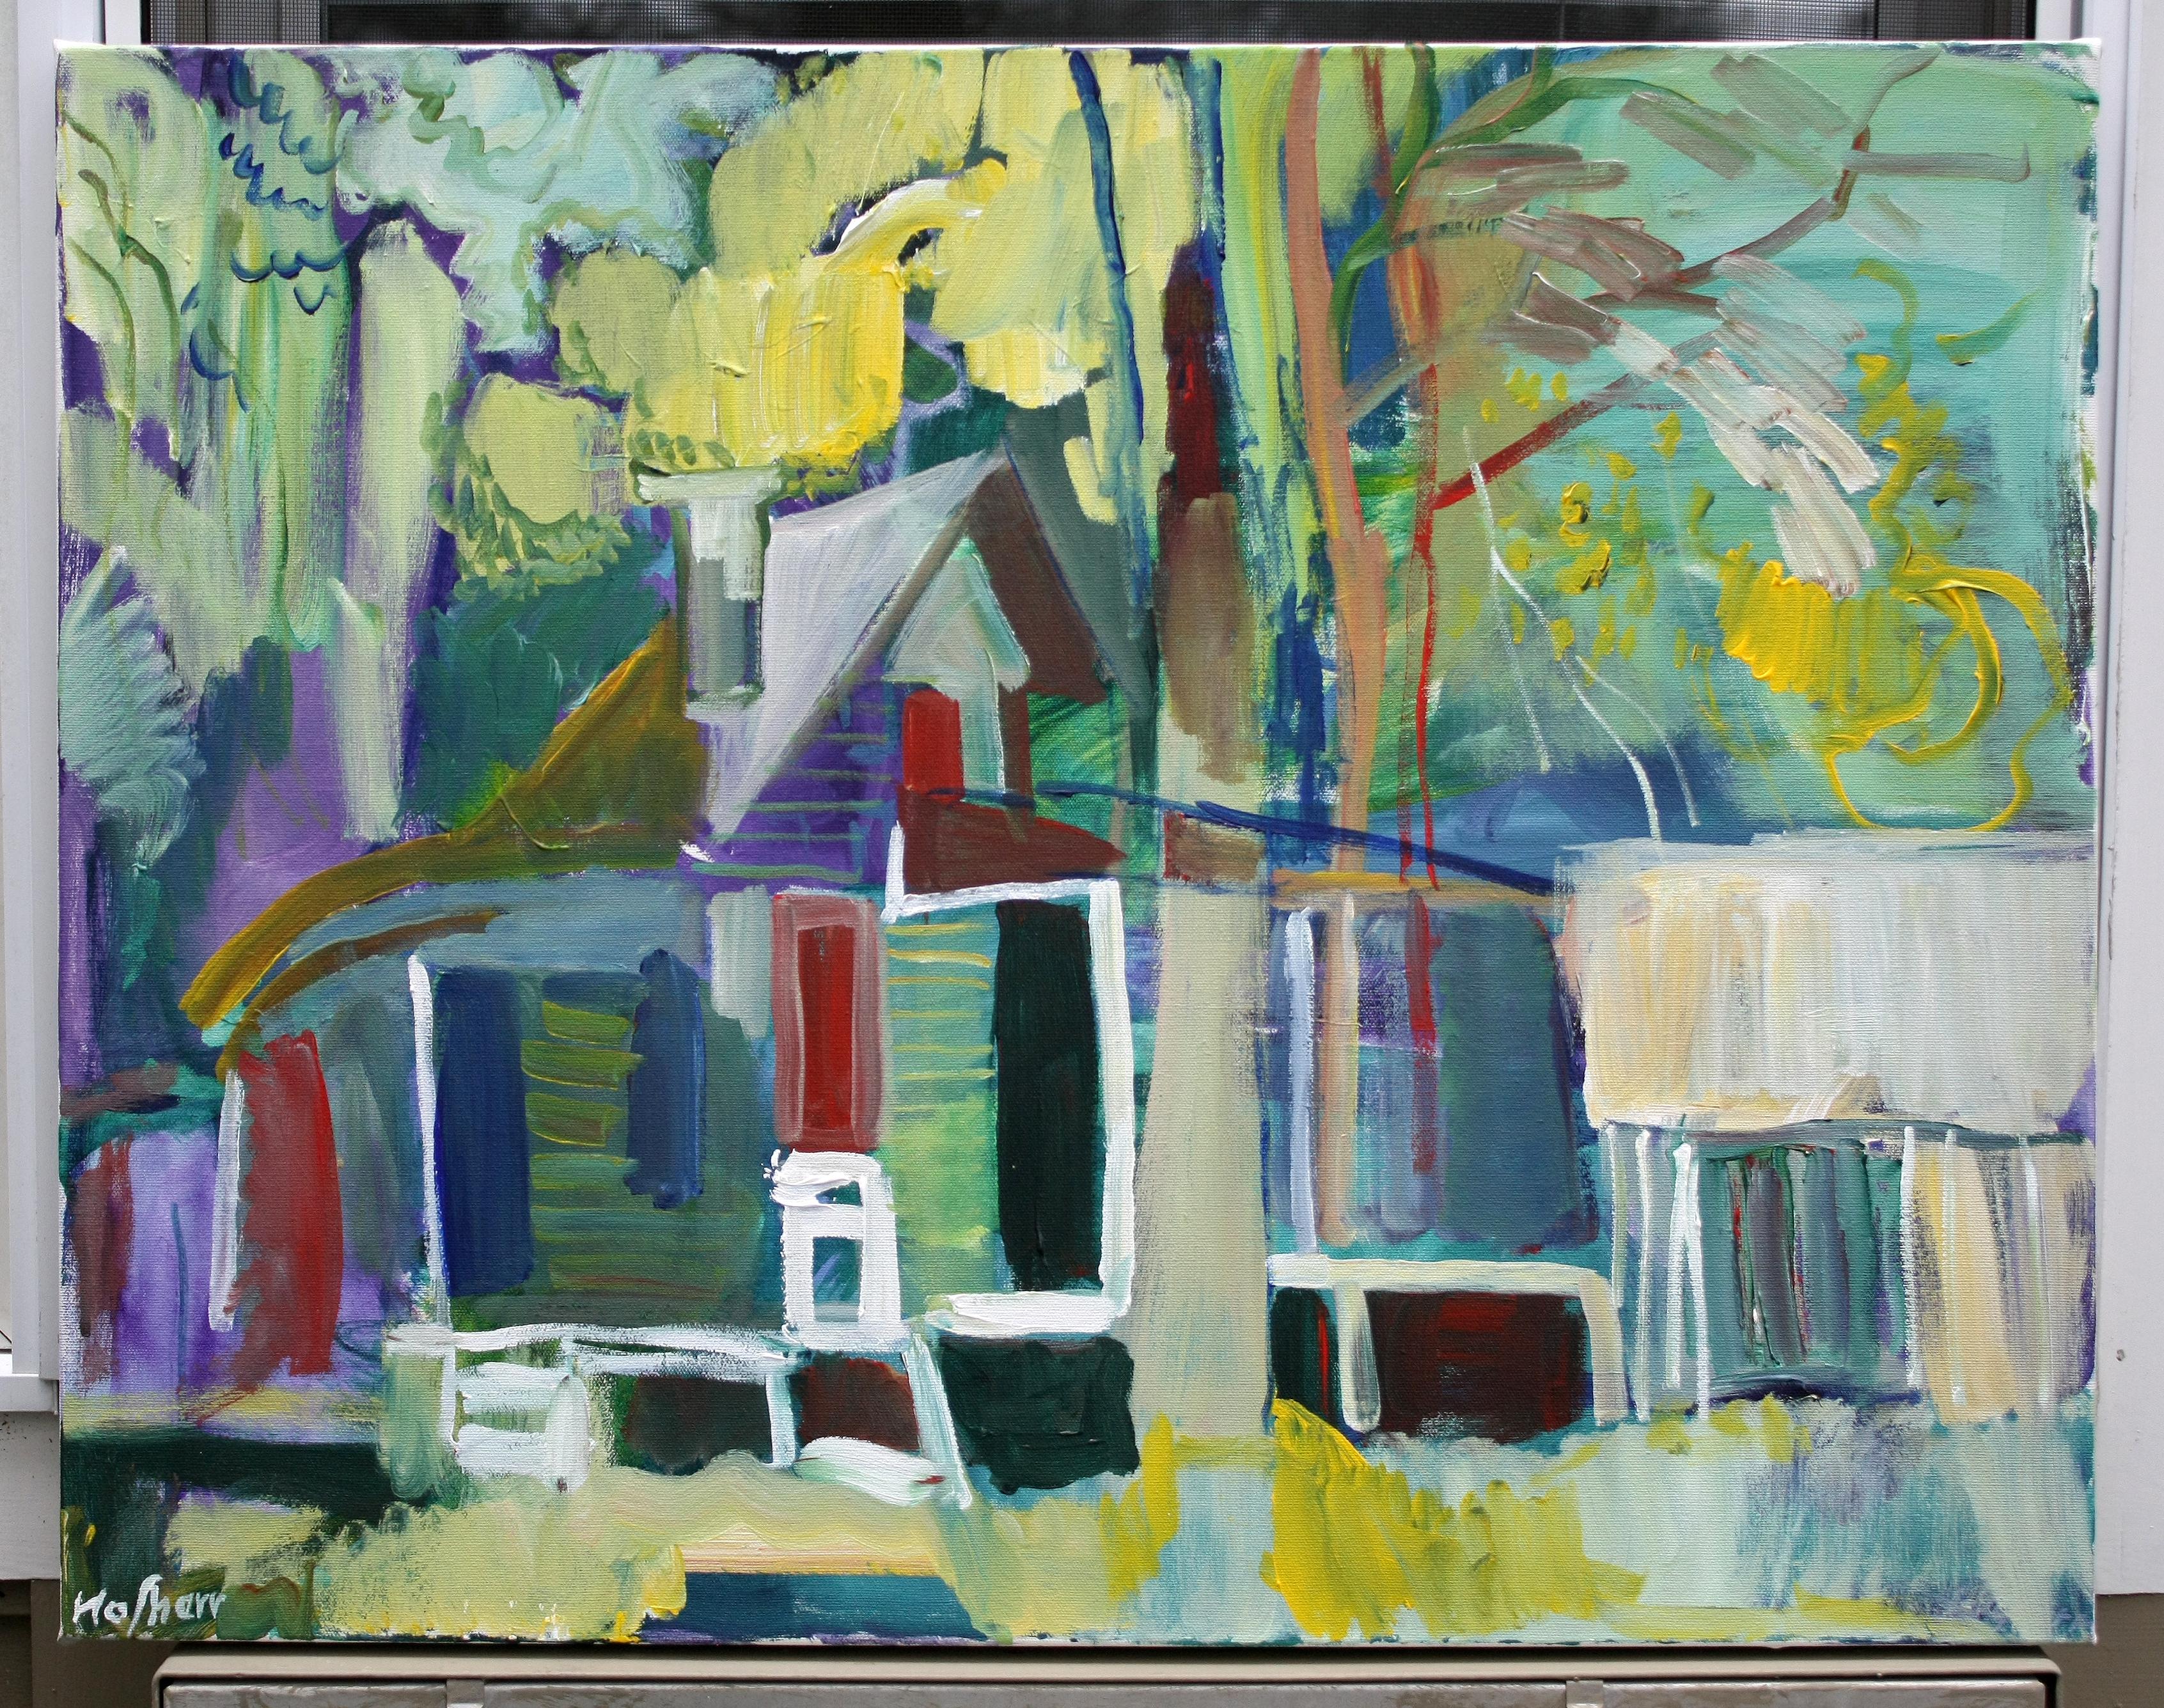 <p>Artist Comments<br>An expressionist depiction of a cabin displays its eclectic walls, with the surrounding woods emerging as vibrant shapes. The composition steers away from realism with colors and simple rendition of details. When hanging the